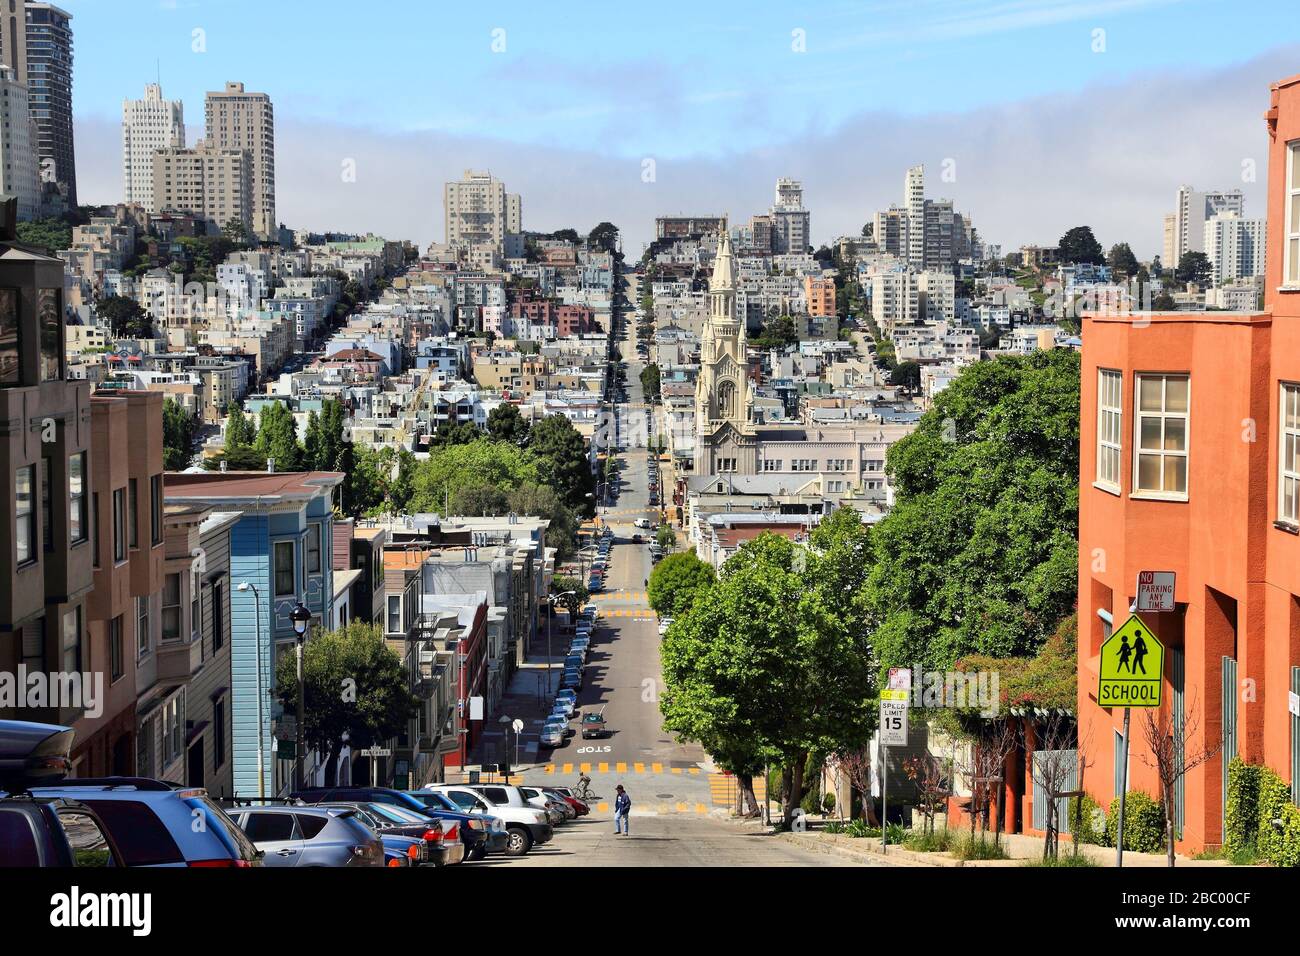 San Francisco, California, United States - city skyline with Russian Hill. Stock Photo